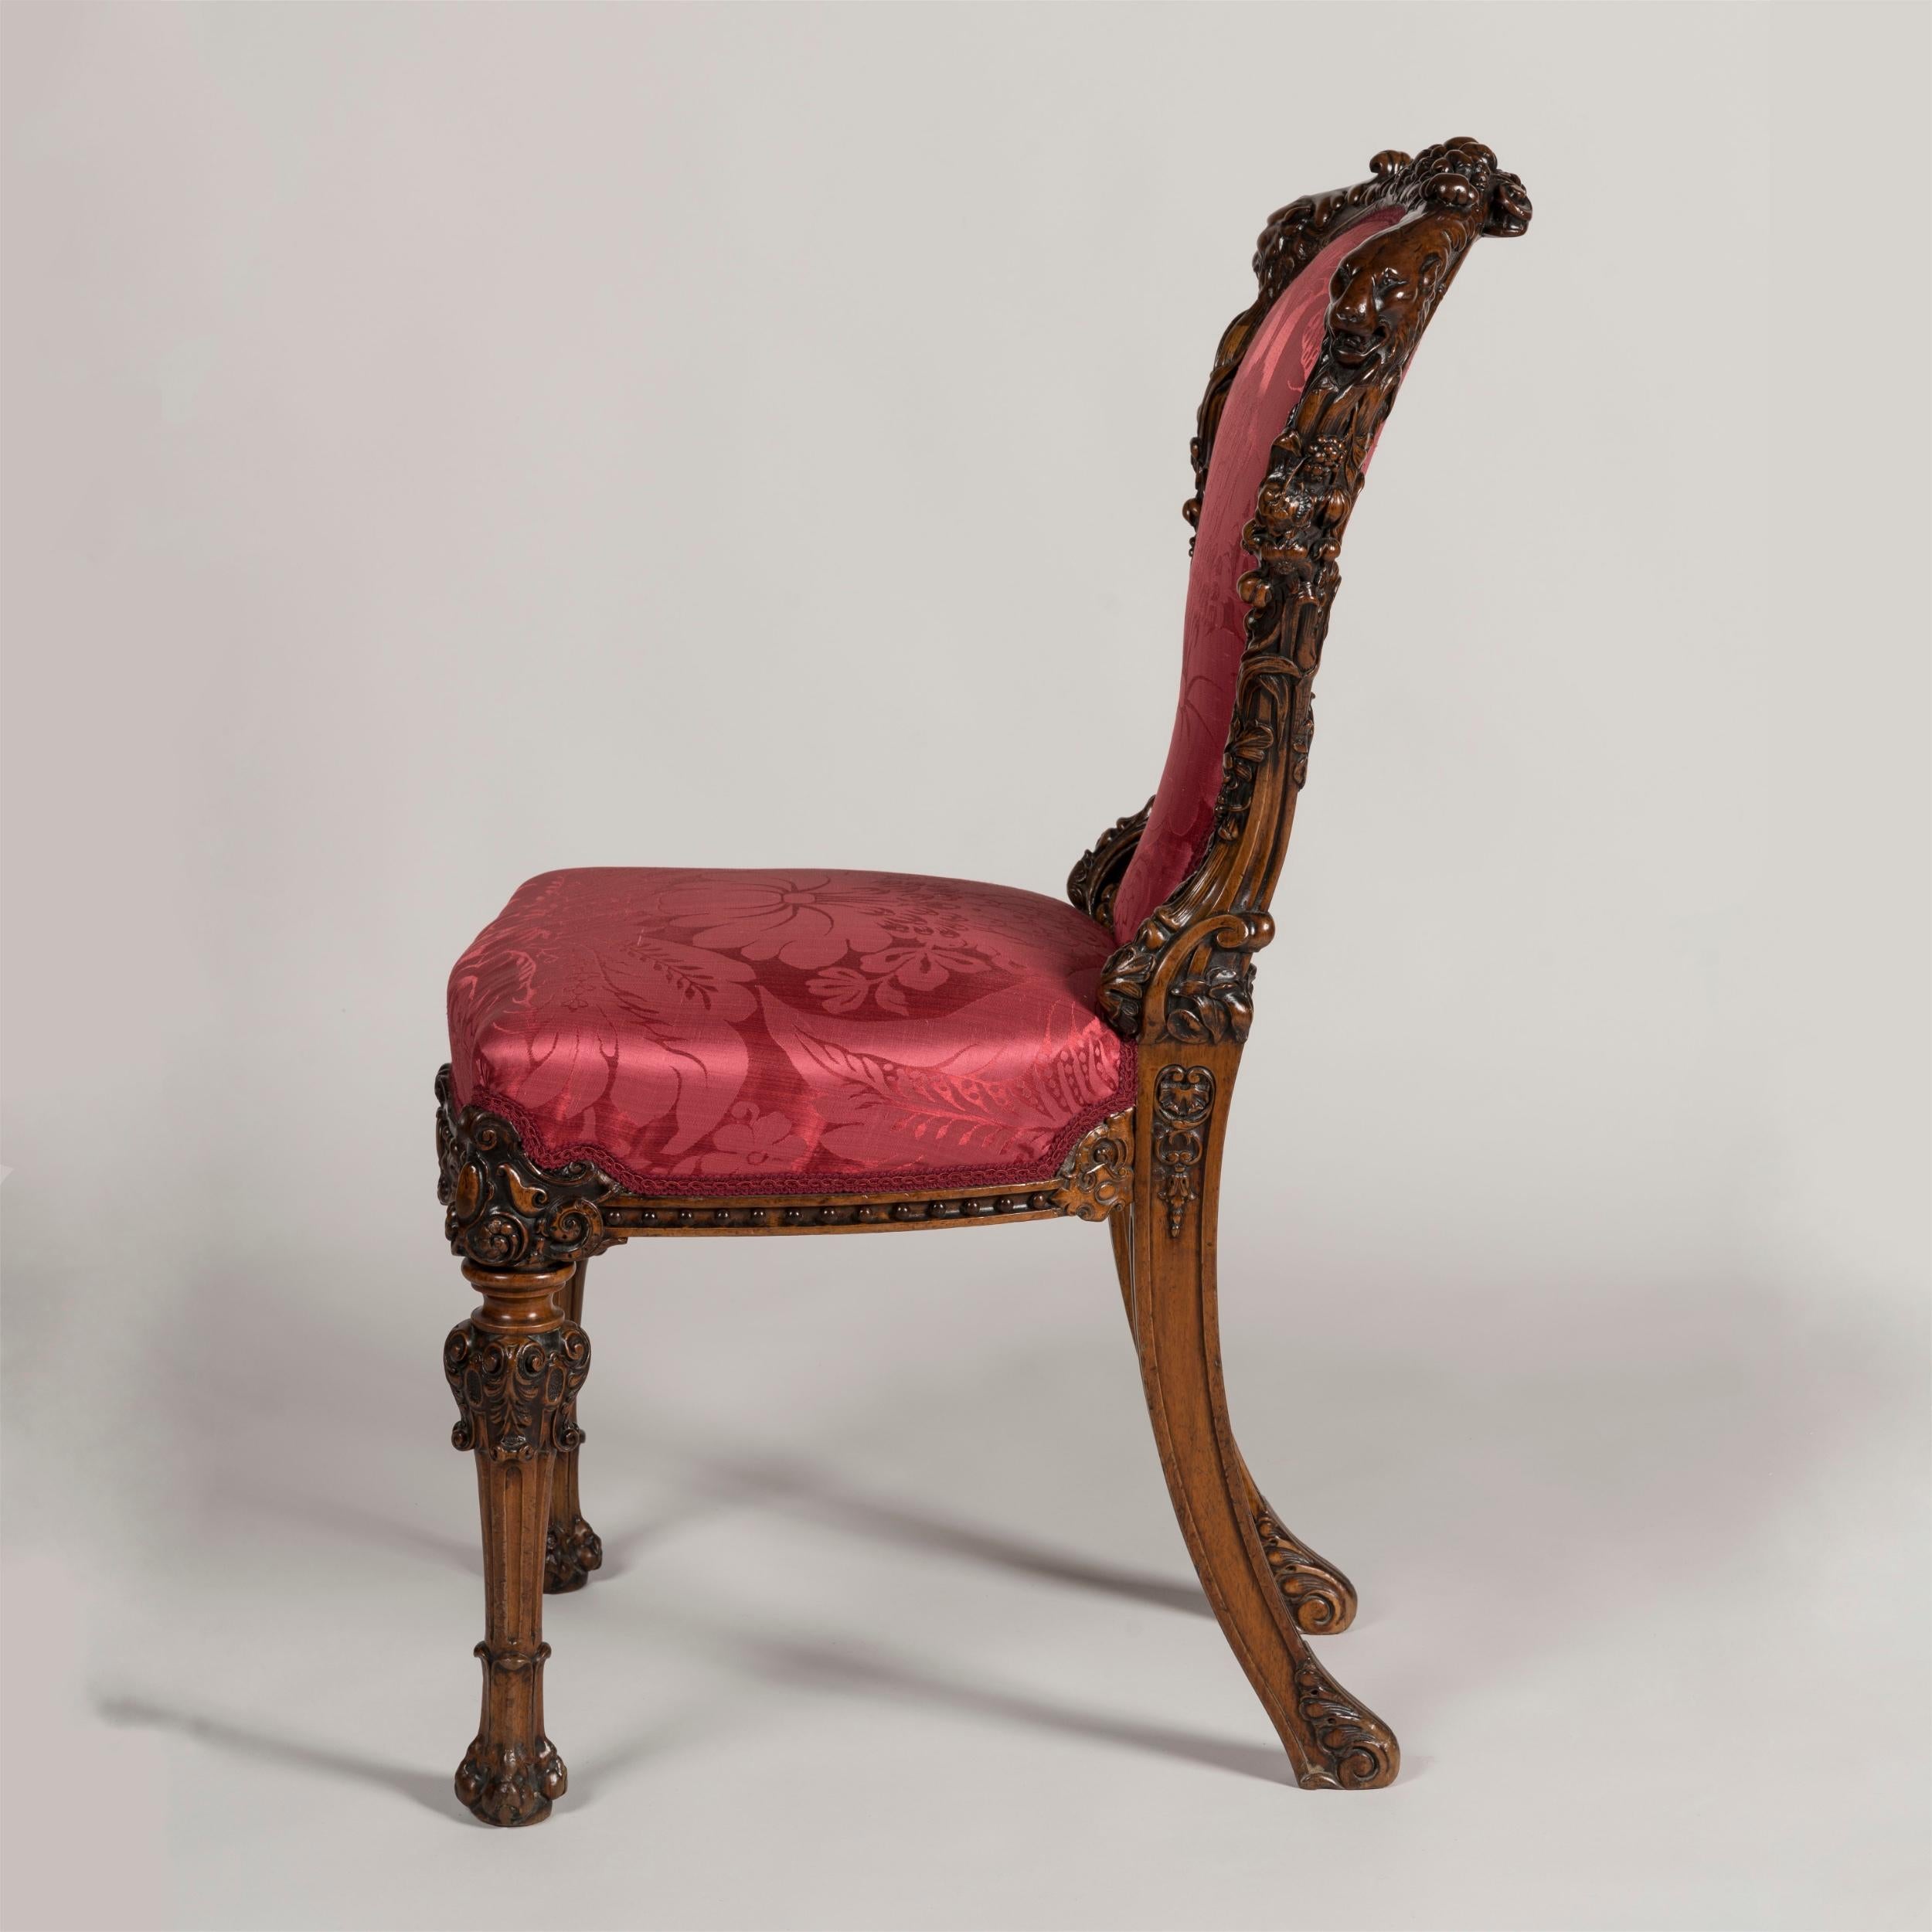 English Mid-19th Century Exuberantly Carved Walnut Chair with Ruby Red Upholstery For Sale